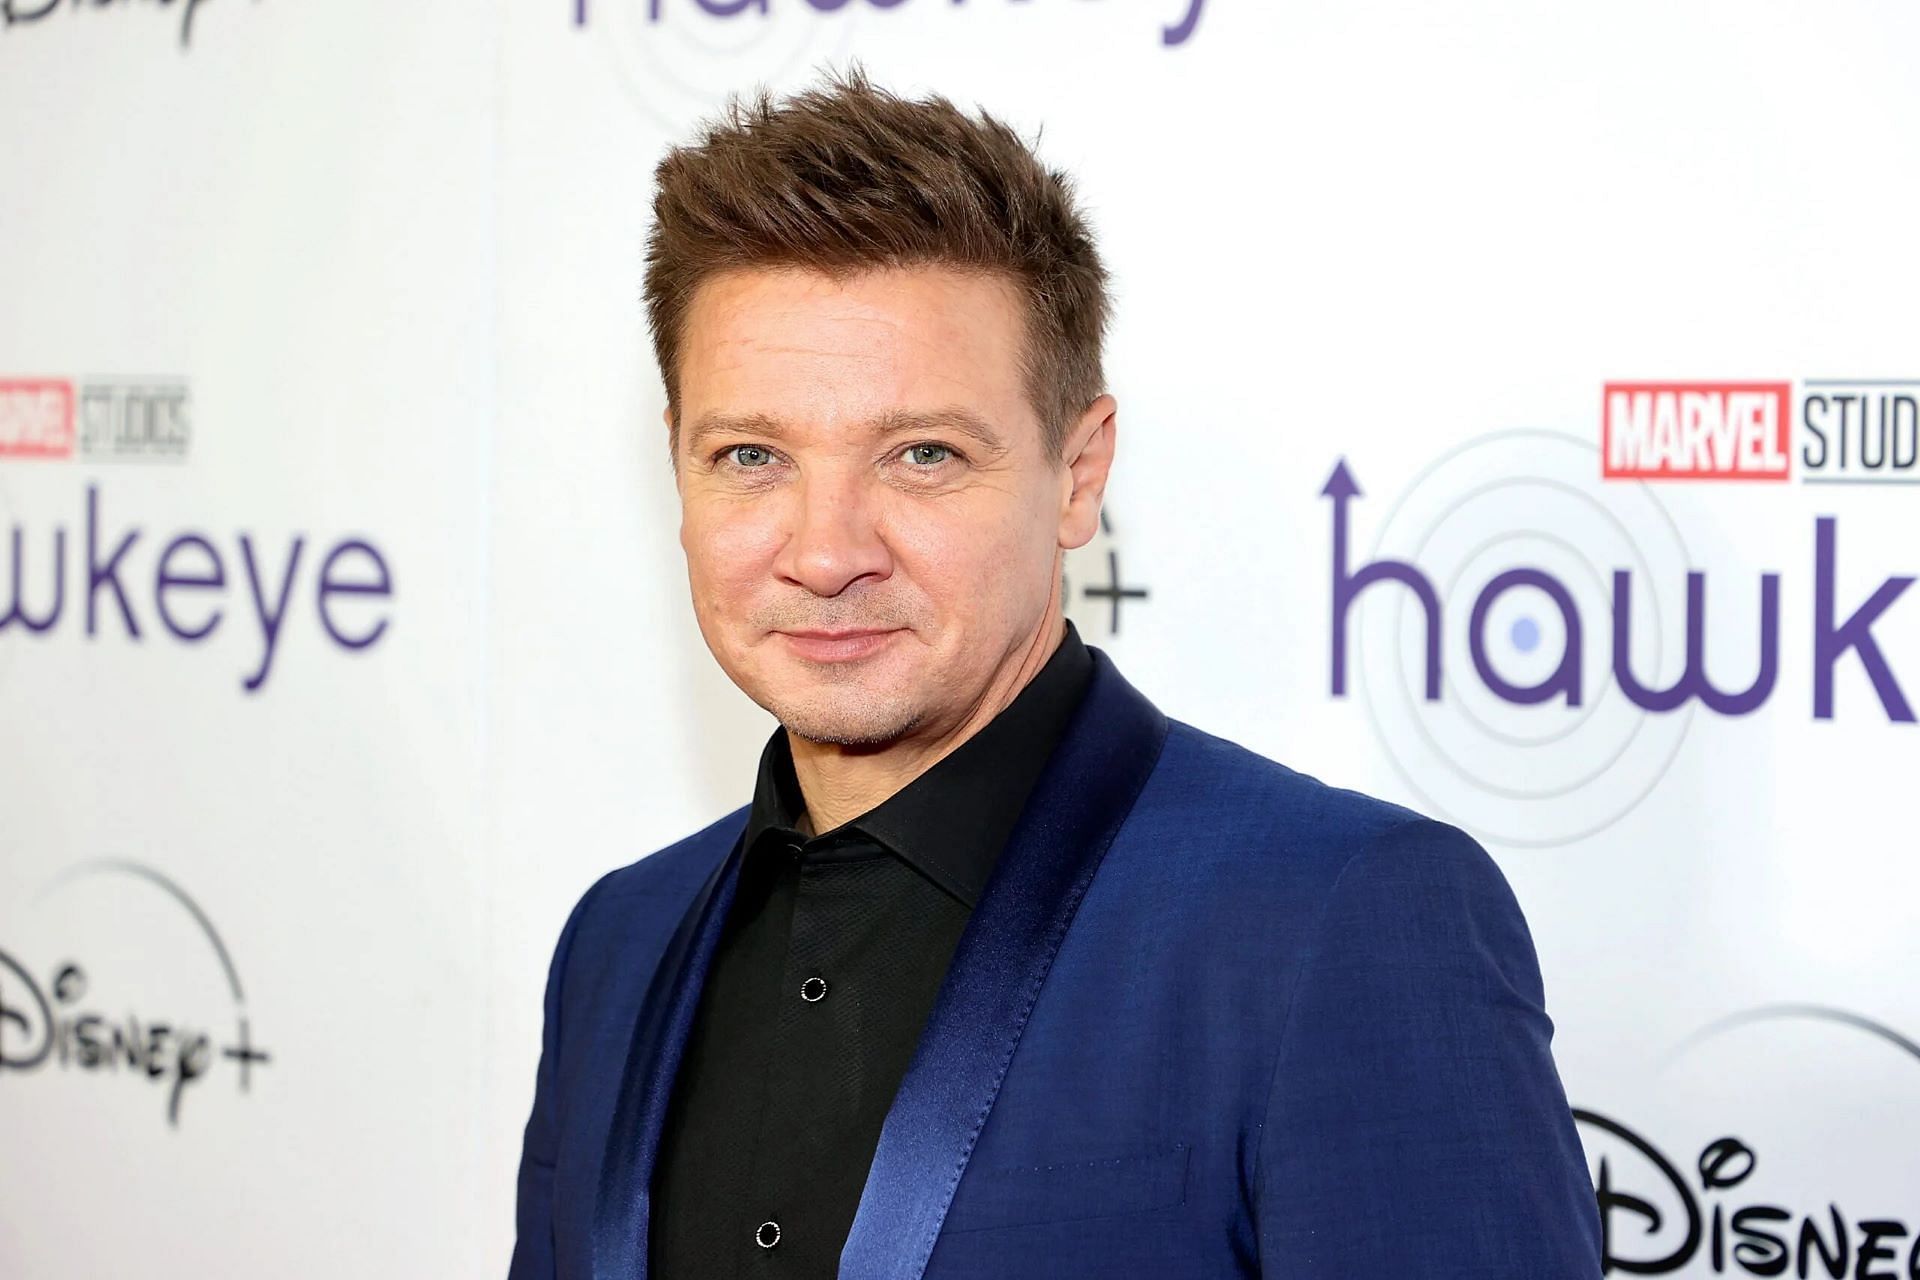 Jeremy Renner at an event for Hawkeye (Image via Theo Wargo/Getty Images)